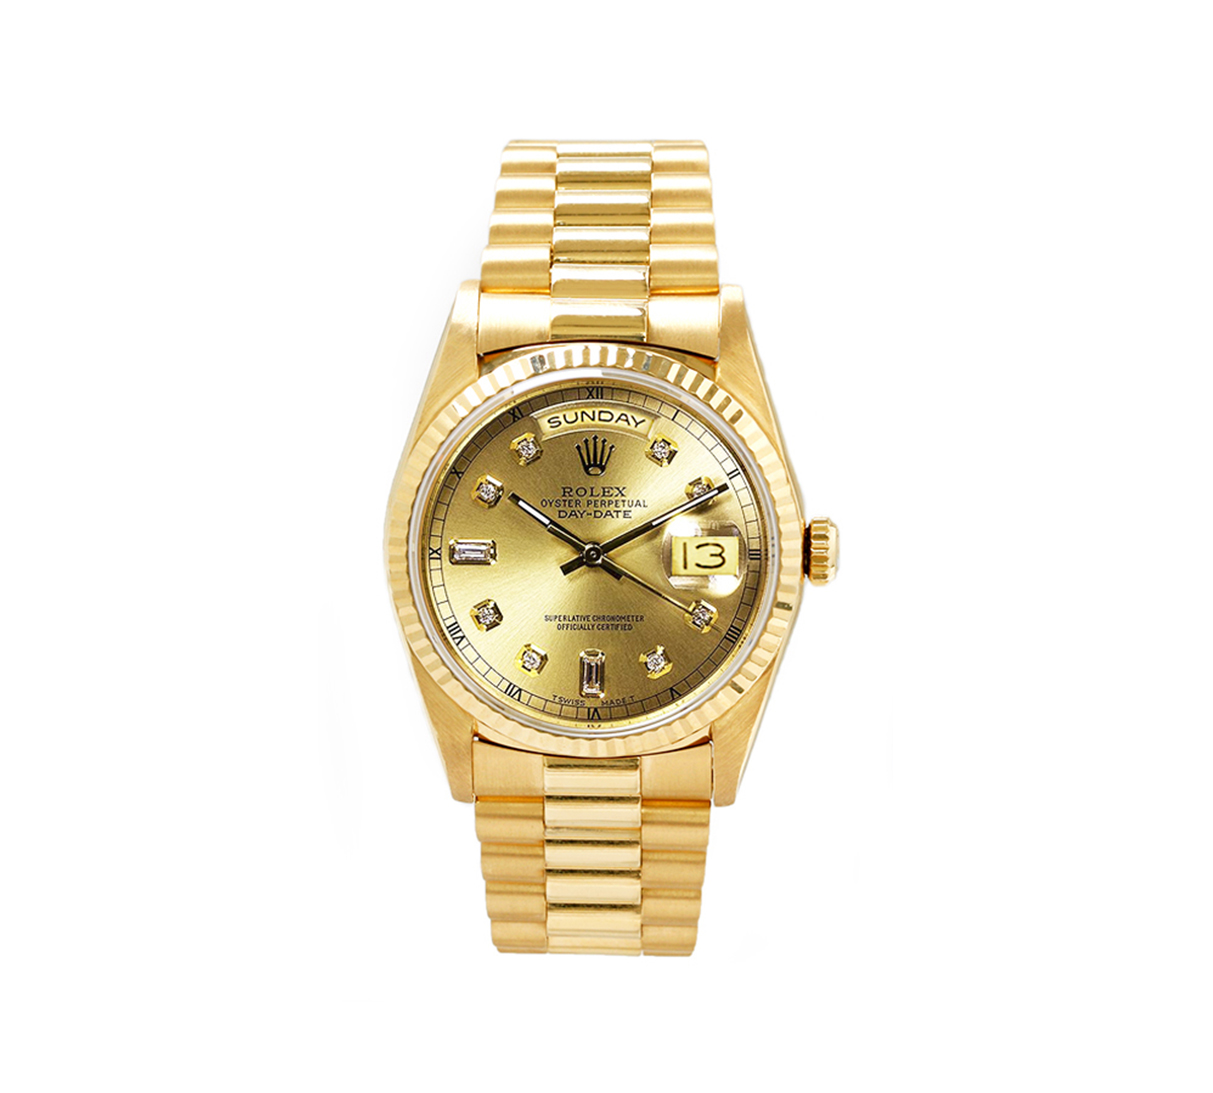 rolex oyster perpetual datejust superlative chronometer officially certified 18k gold